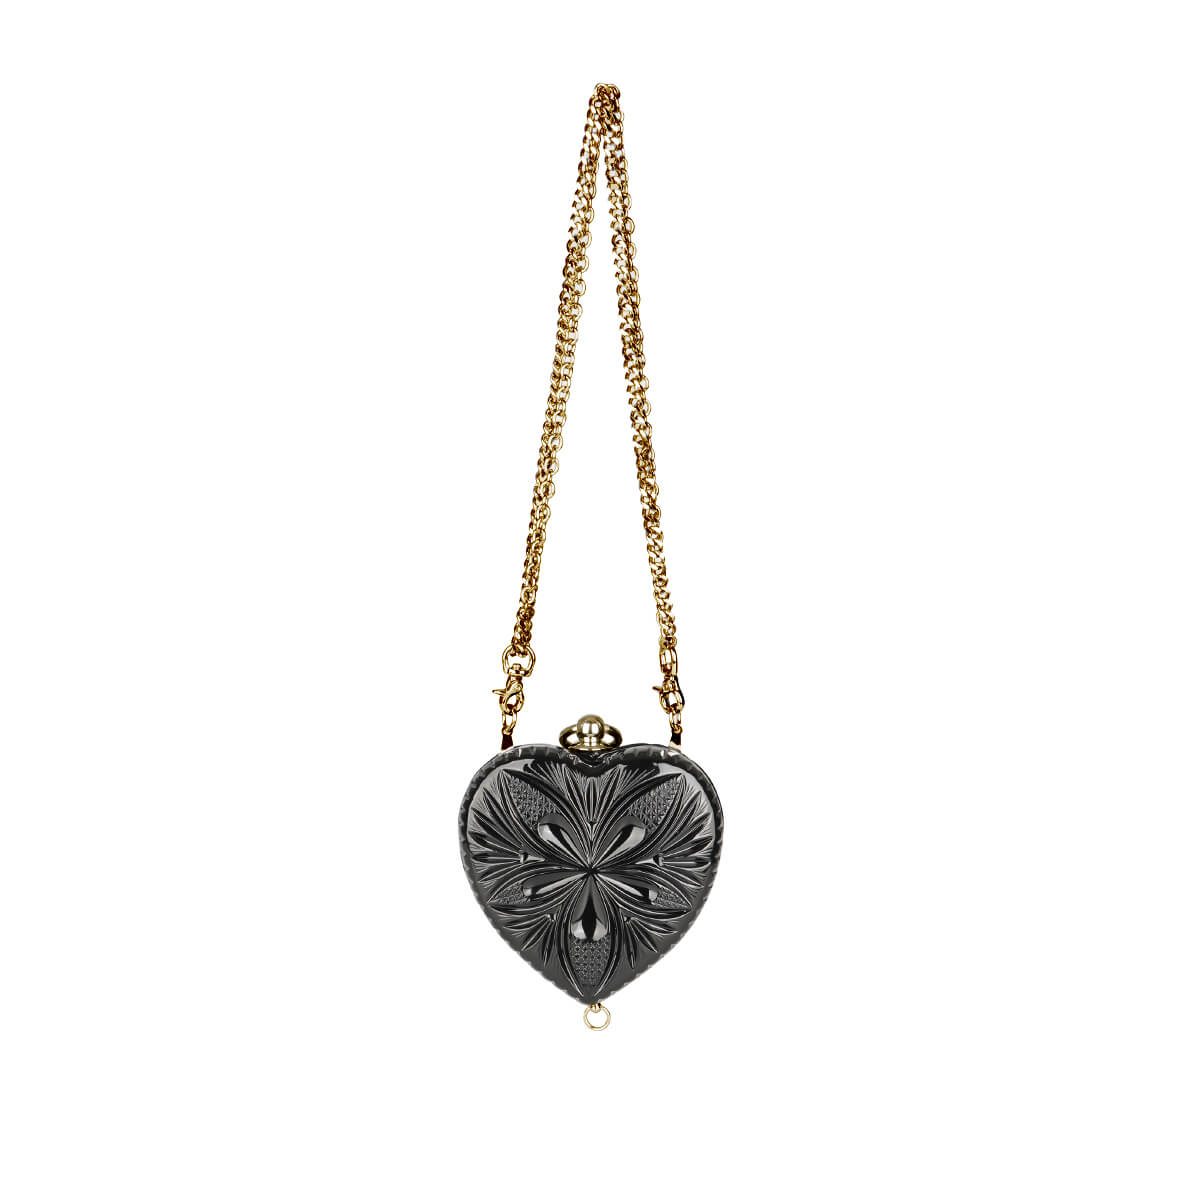 NEW IN Amour Heart Clutch Black